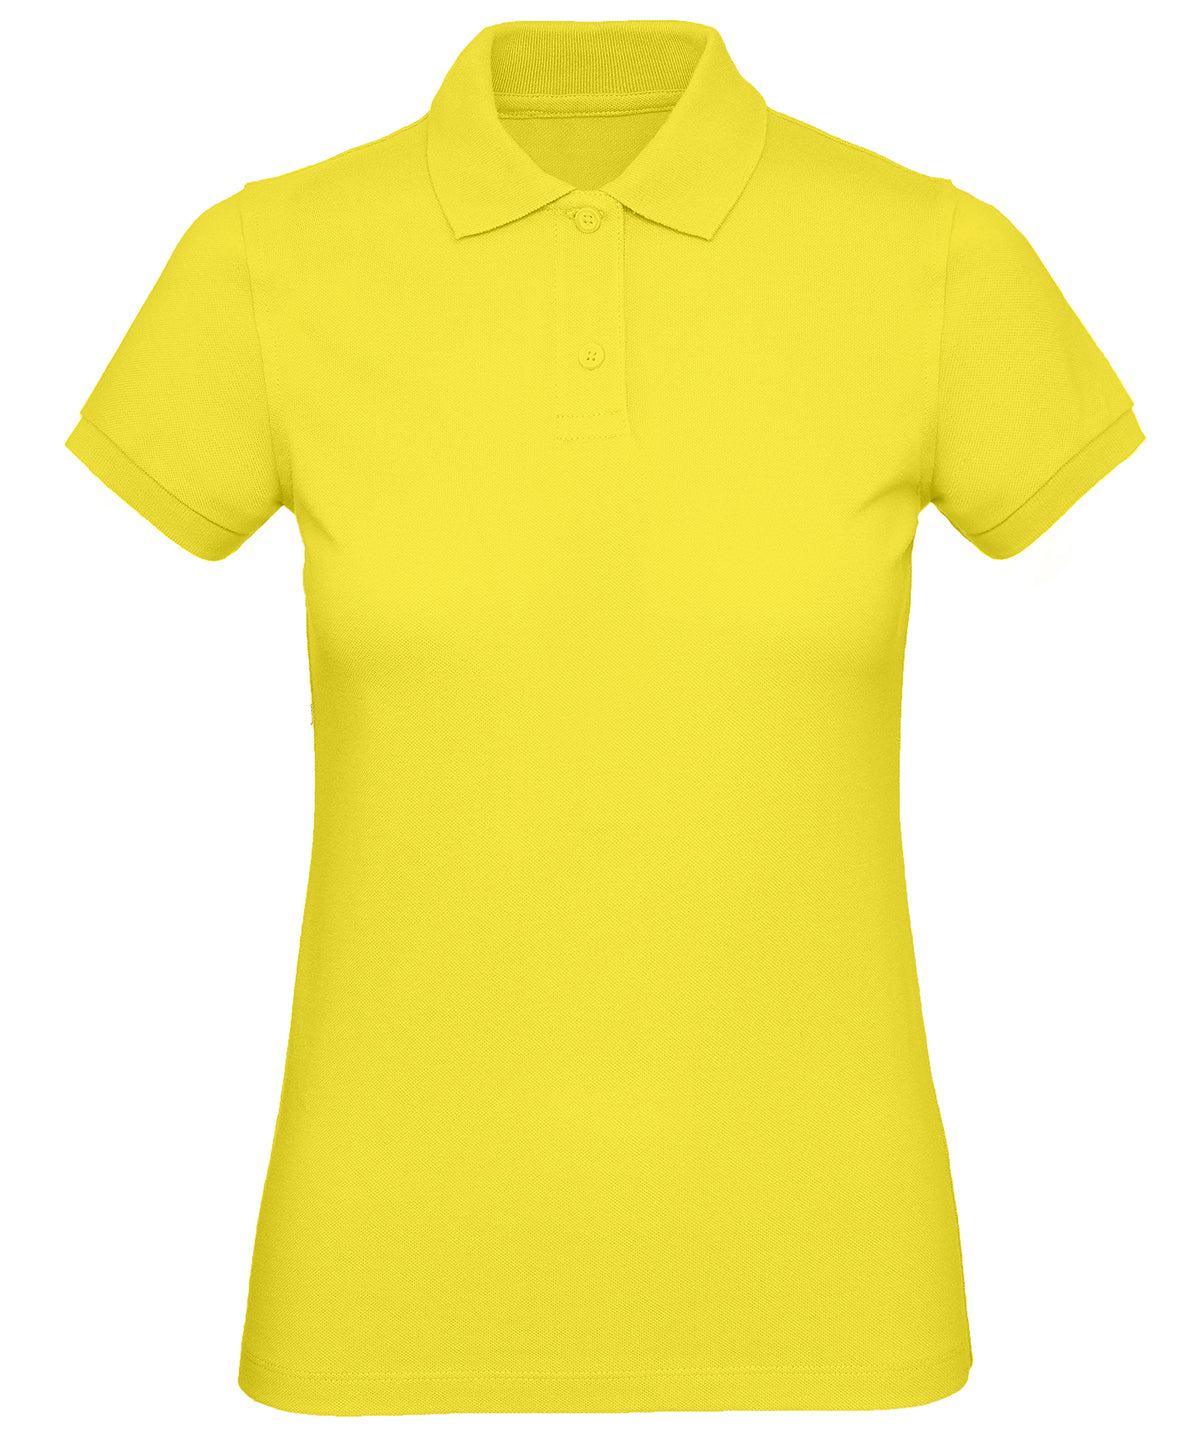 Personalised Polo Shirts - White B&C Collection B&C Inspire Polo /women